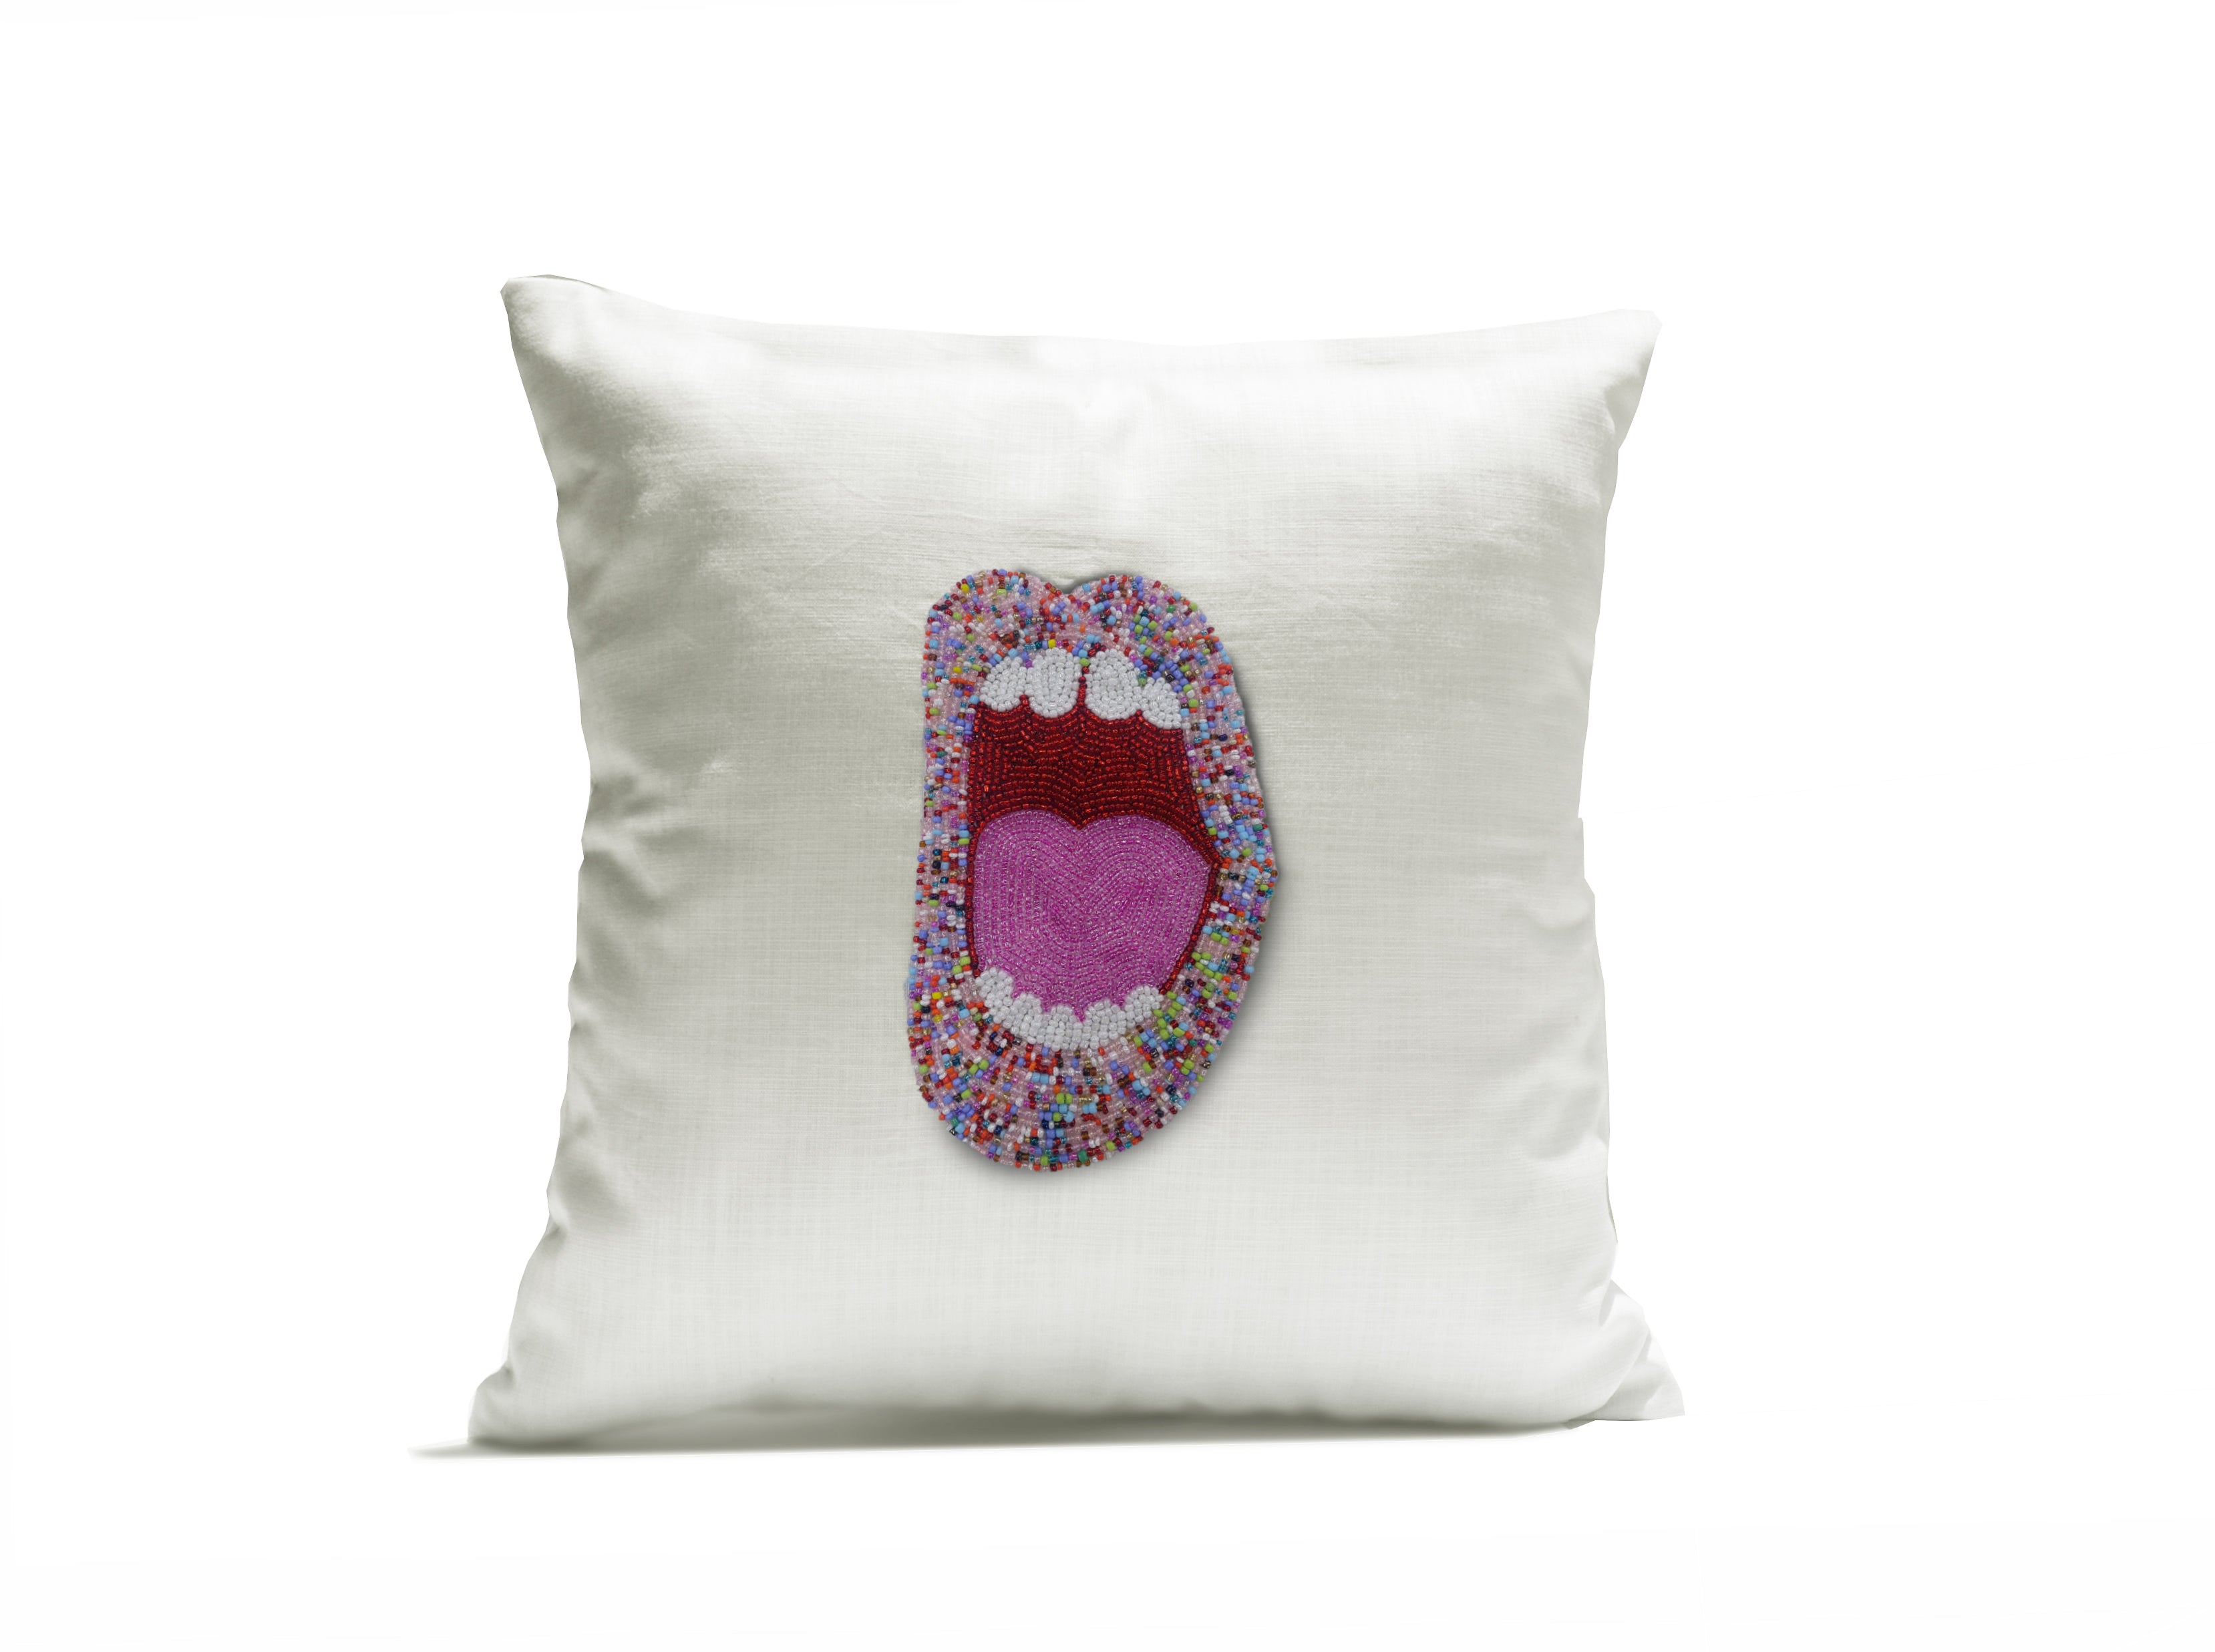 Amore Beaute Shout Out Pop Art Pillow Cover With Multi Color Lips